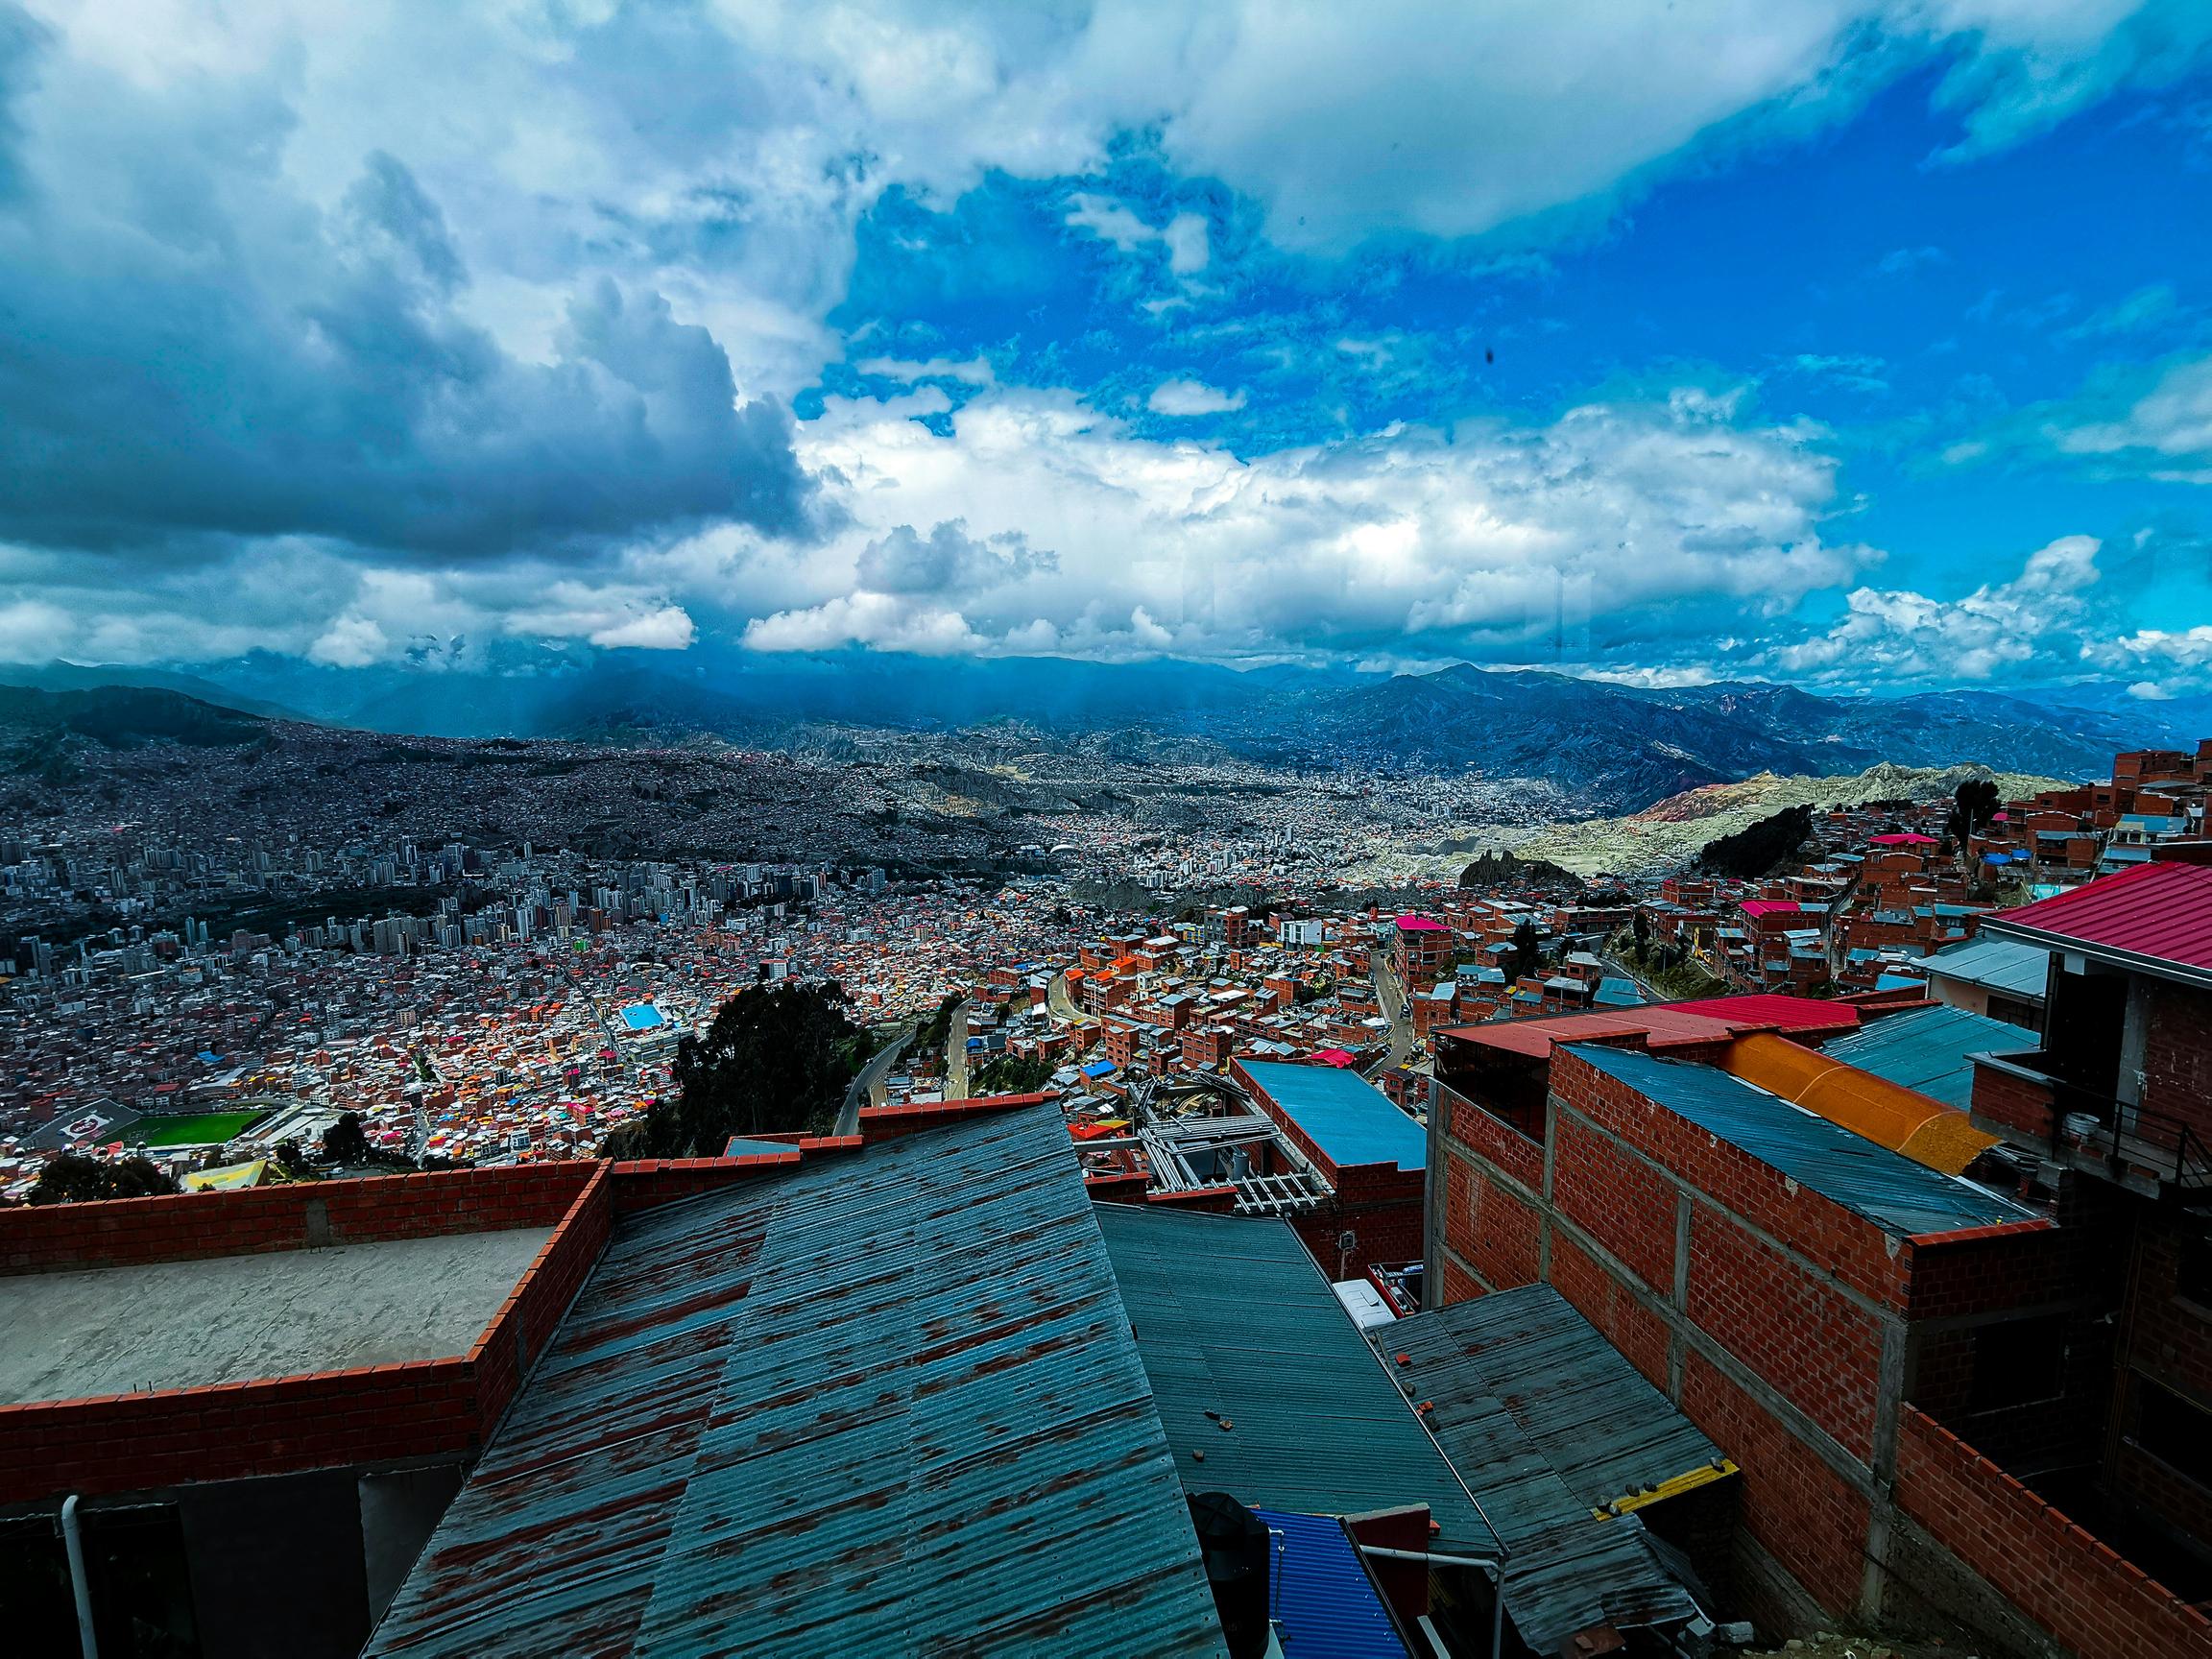 Panoramic view of La Paz seen from a high vantage point.